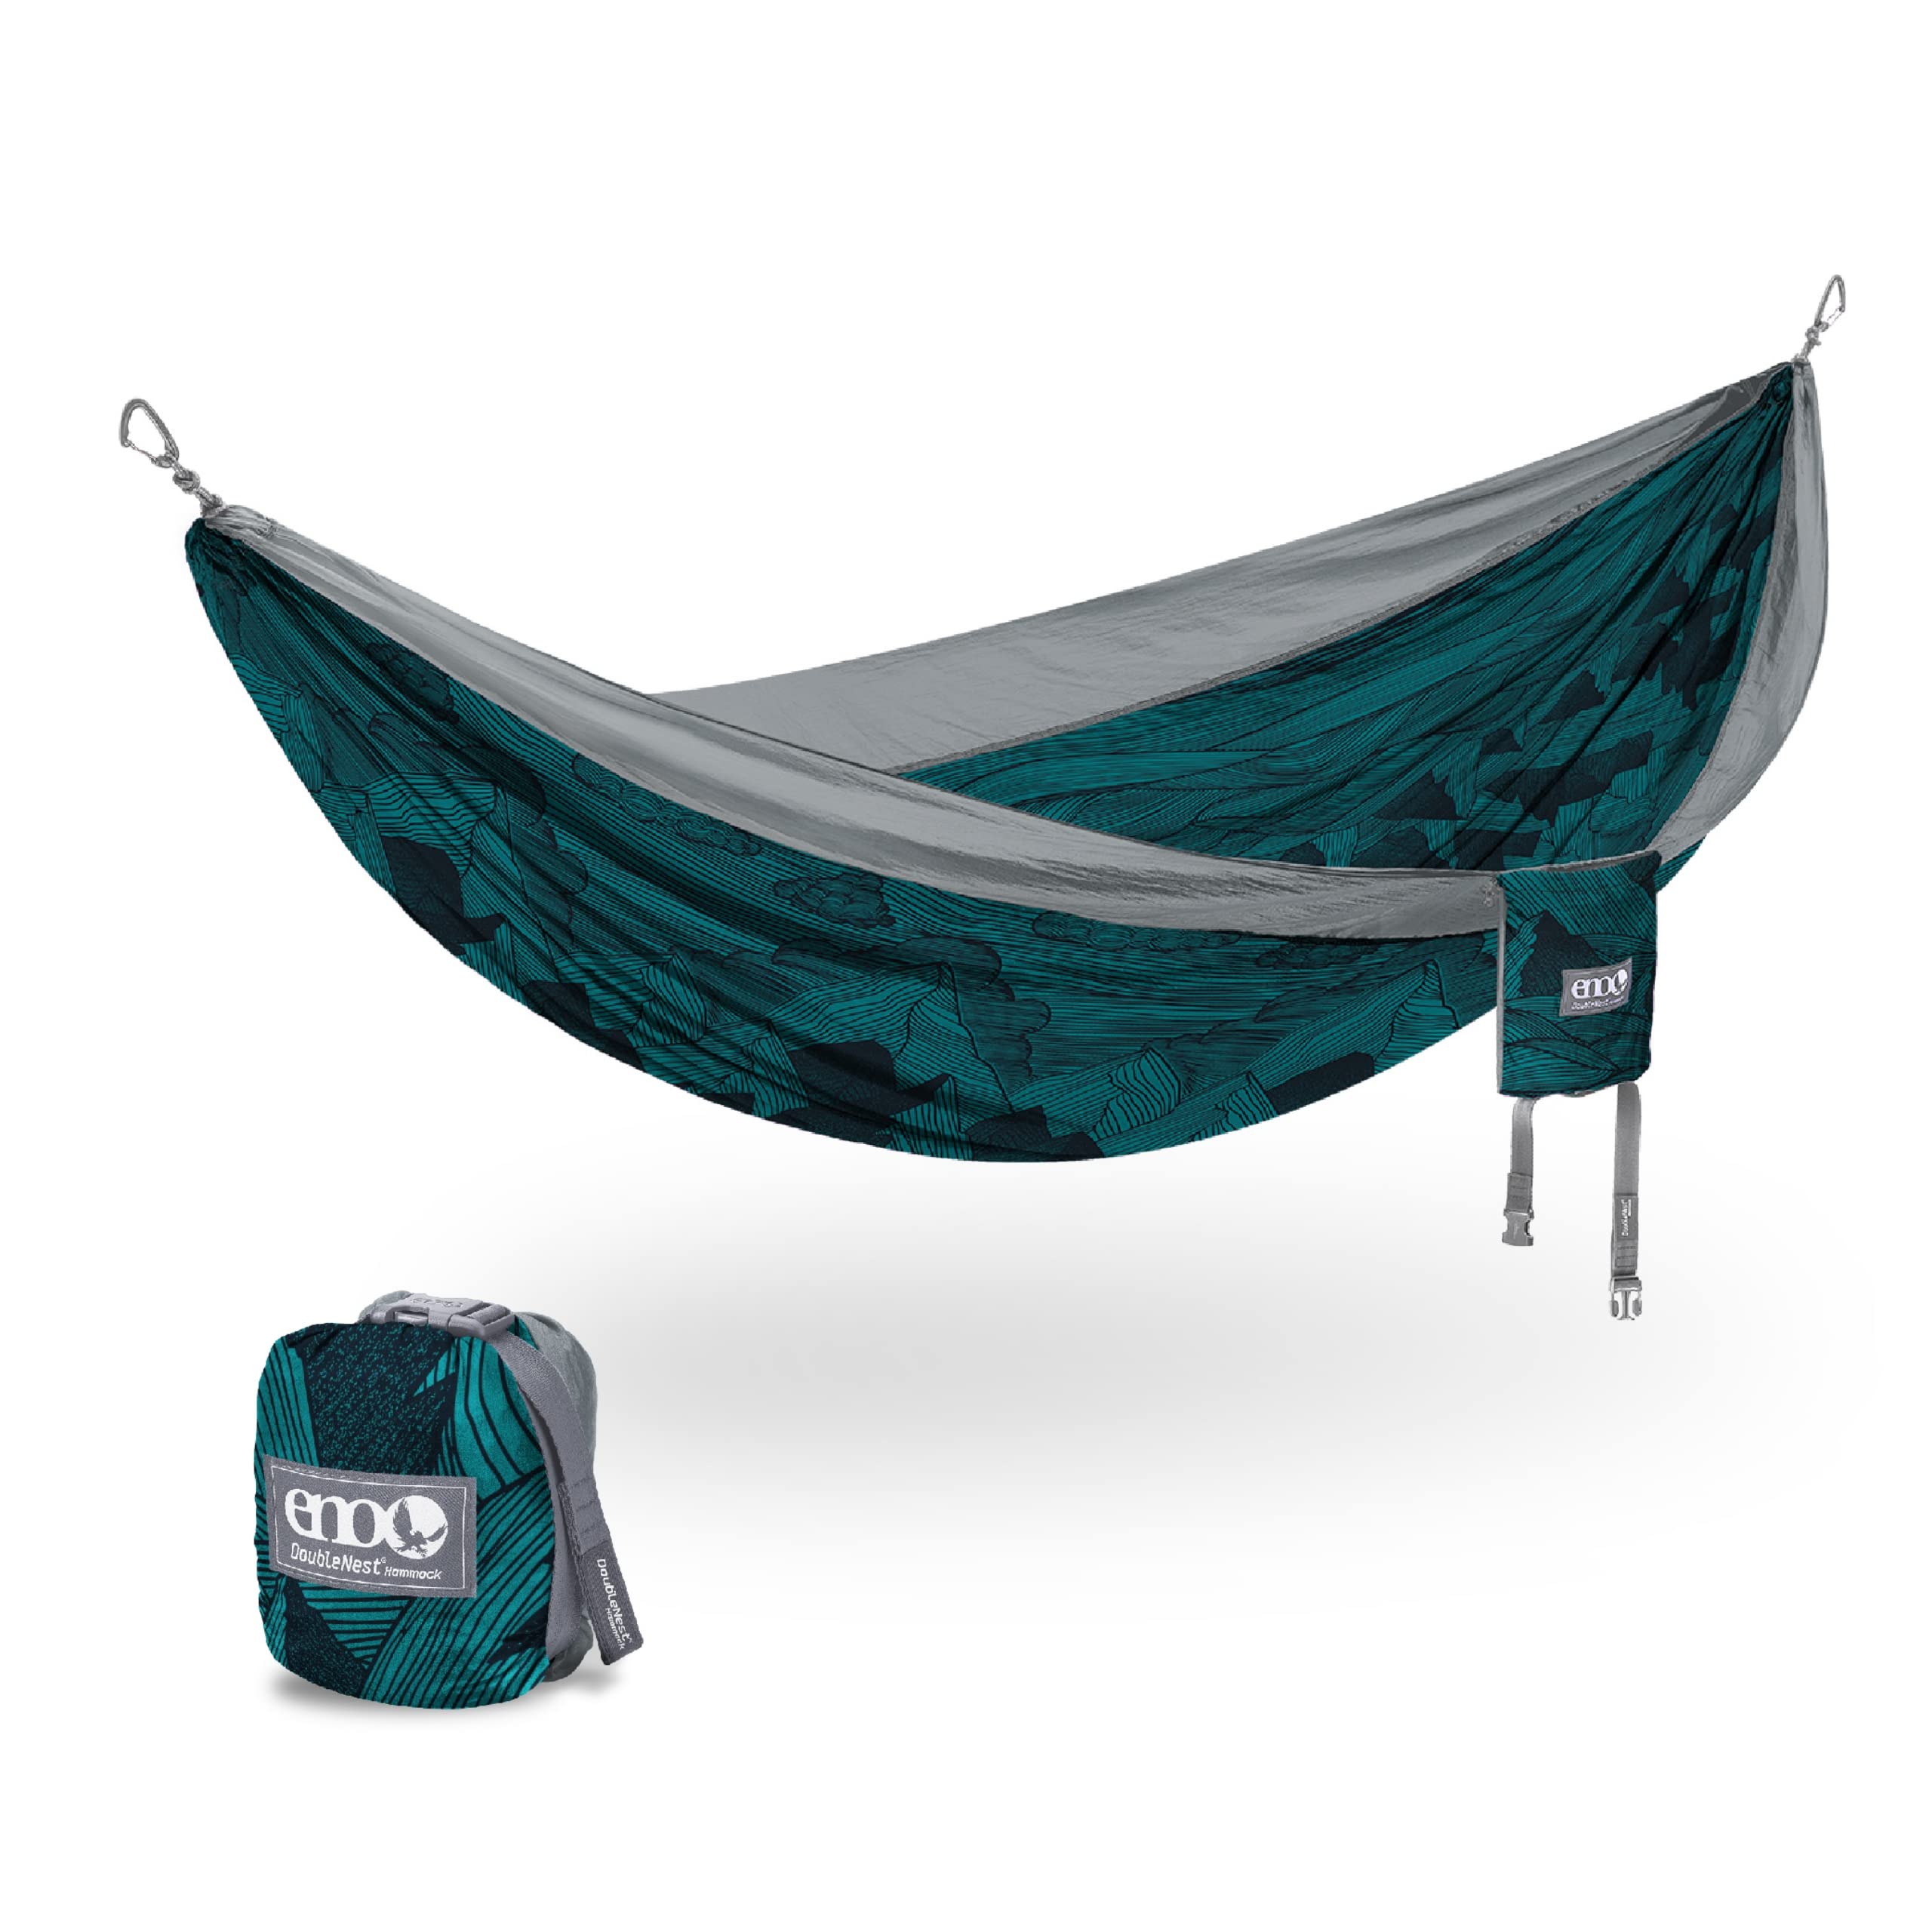 ENO DoubleNest Hammock - Lightweight Portable 1 to 2 Person Hammock - for Camping Hiking Backpacking Travel a Festival